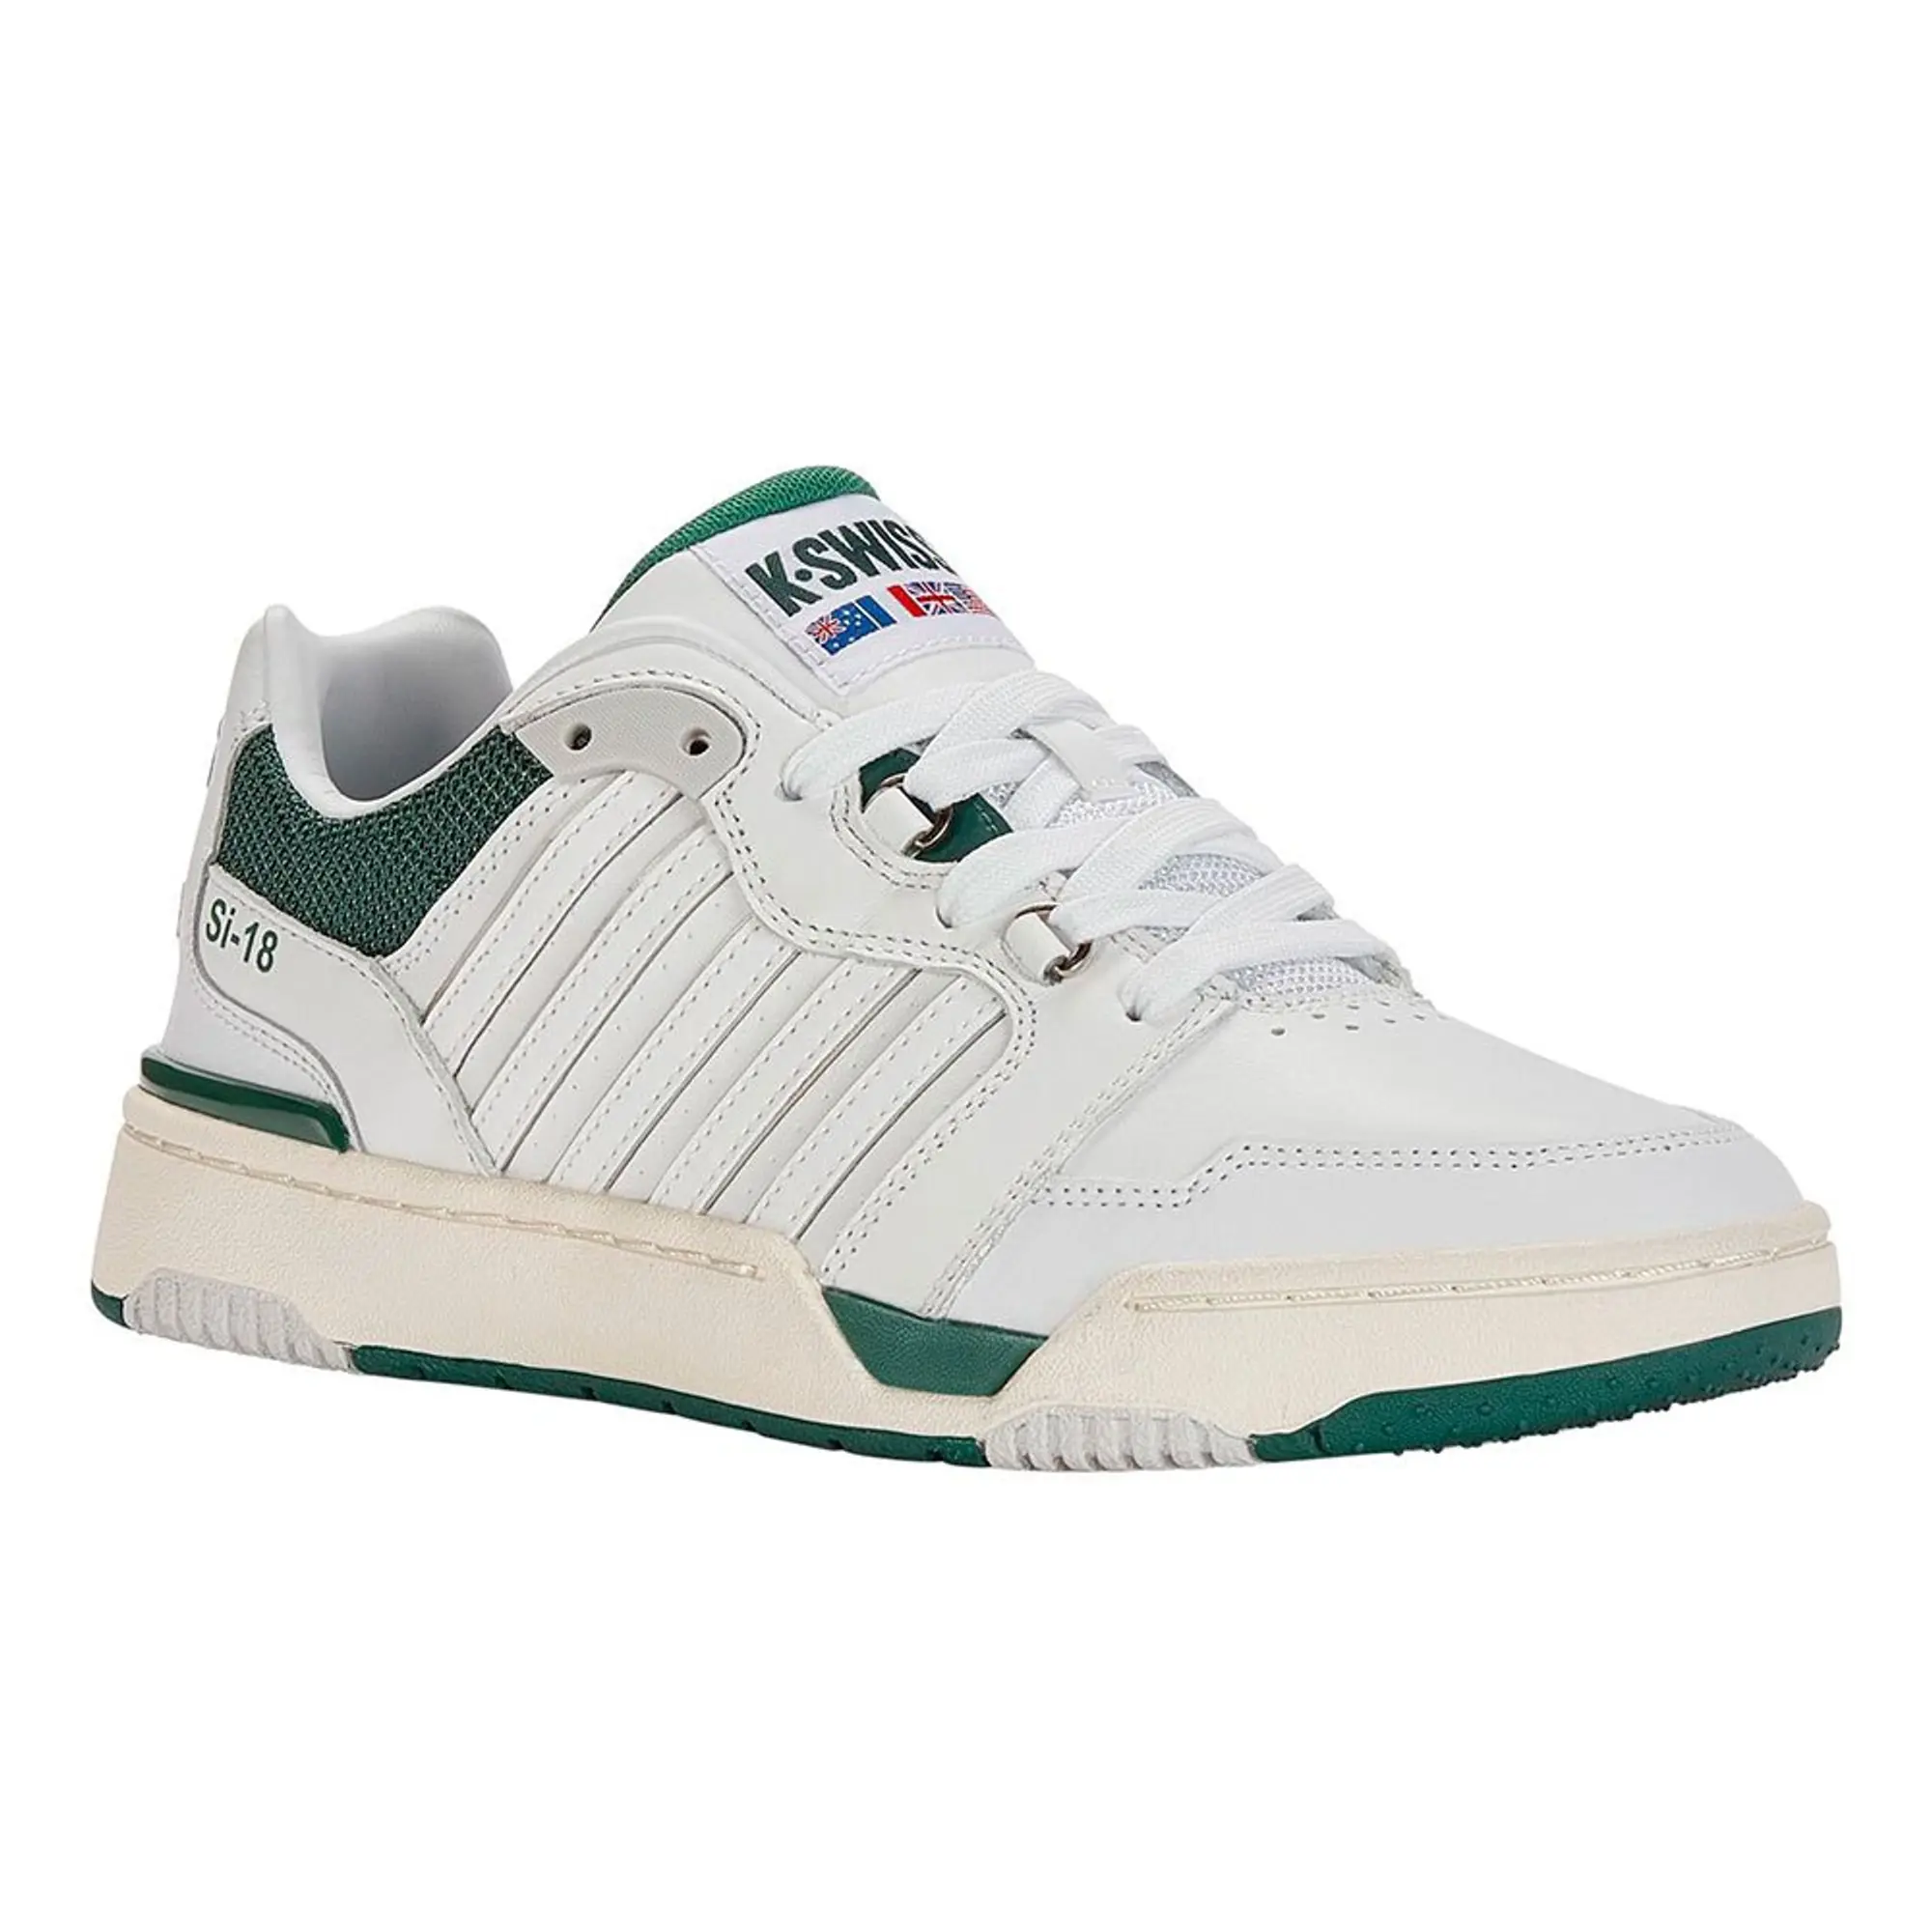 K-swiss Lifestyle Si-18 Rival Trainers  - White